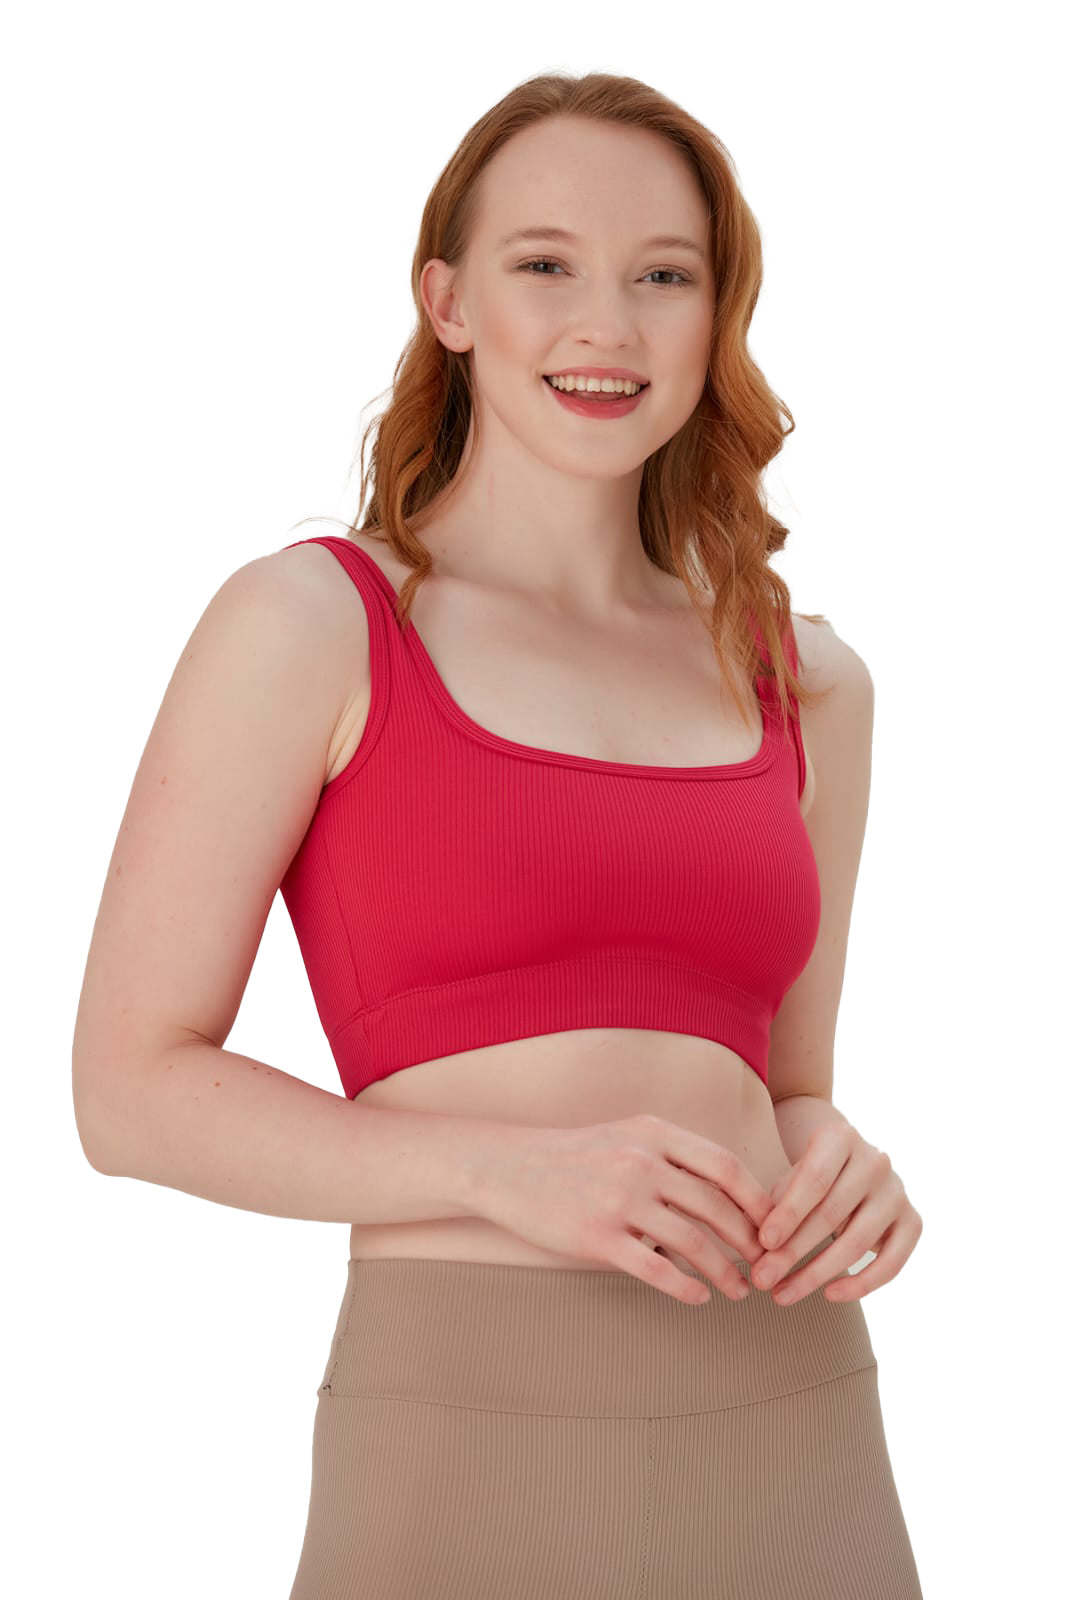 Everyday Yoga Girl's Wholesome Cheetah Sports Bra at YogaOutlet.com –